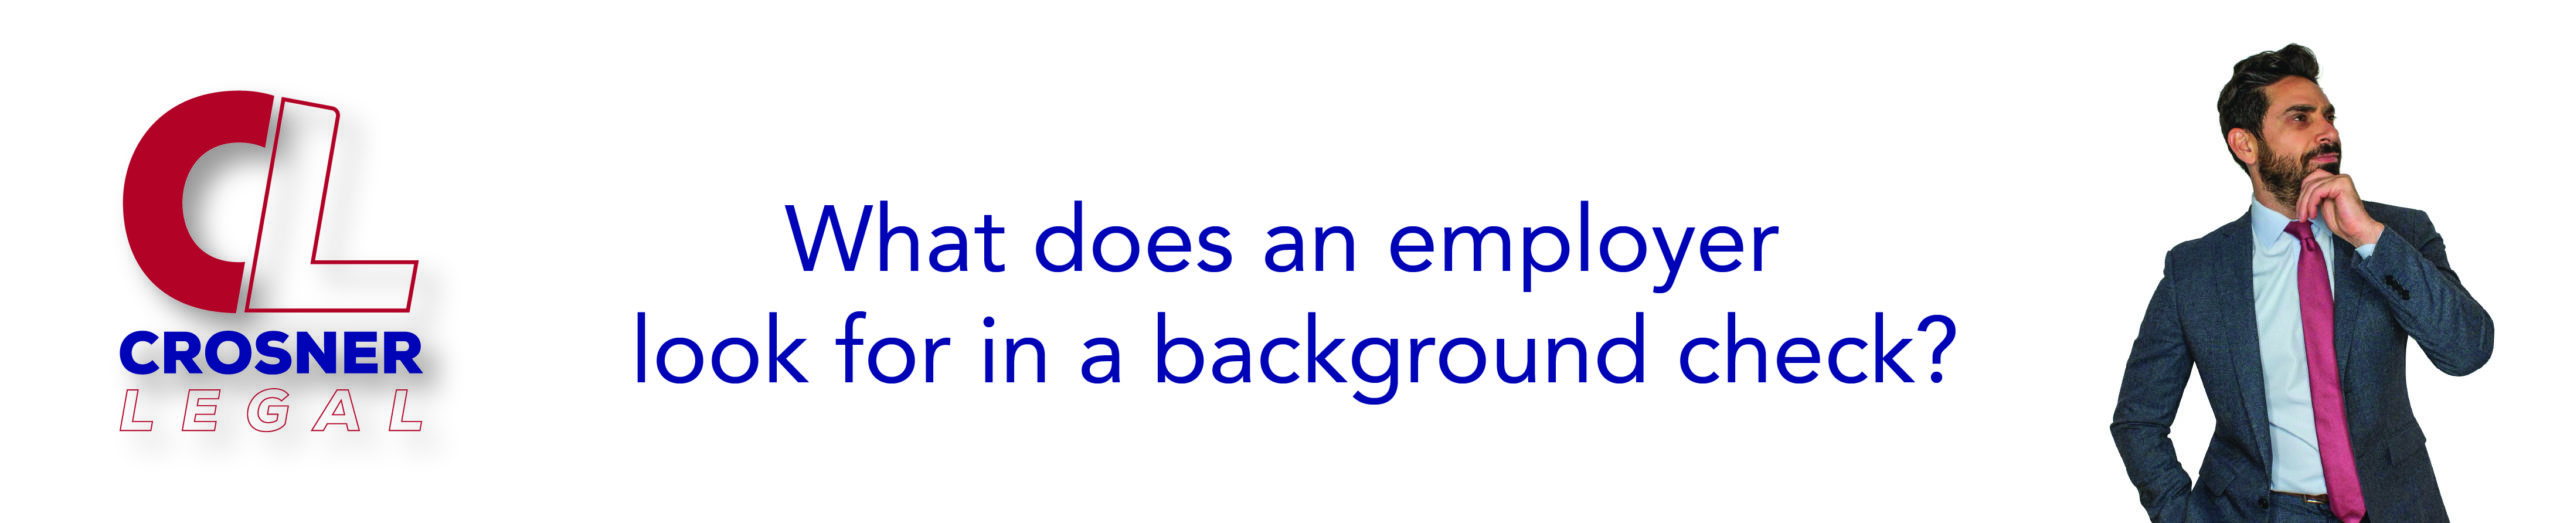 What does an employer look for in a background check?